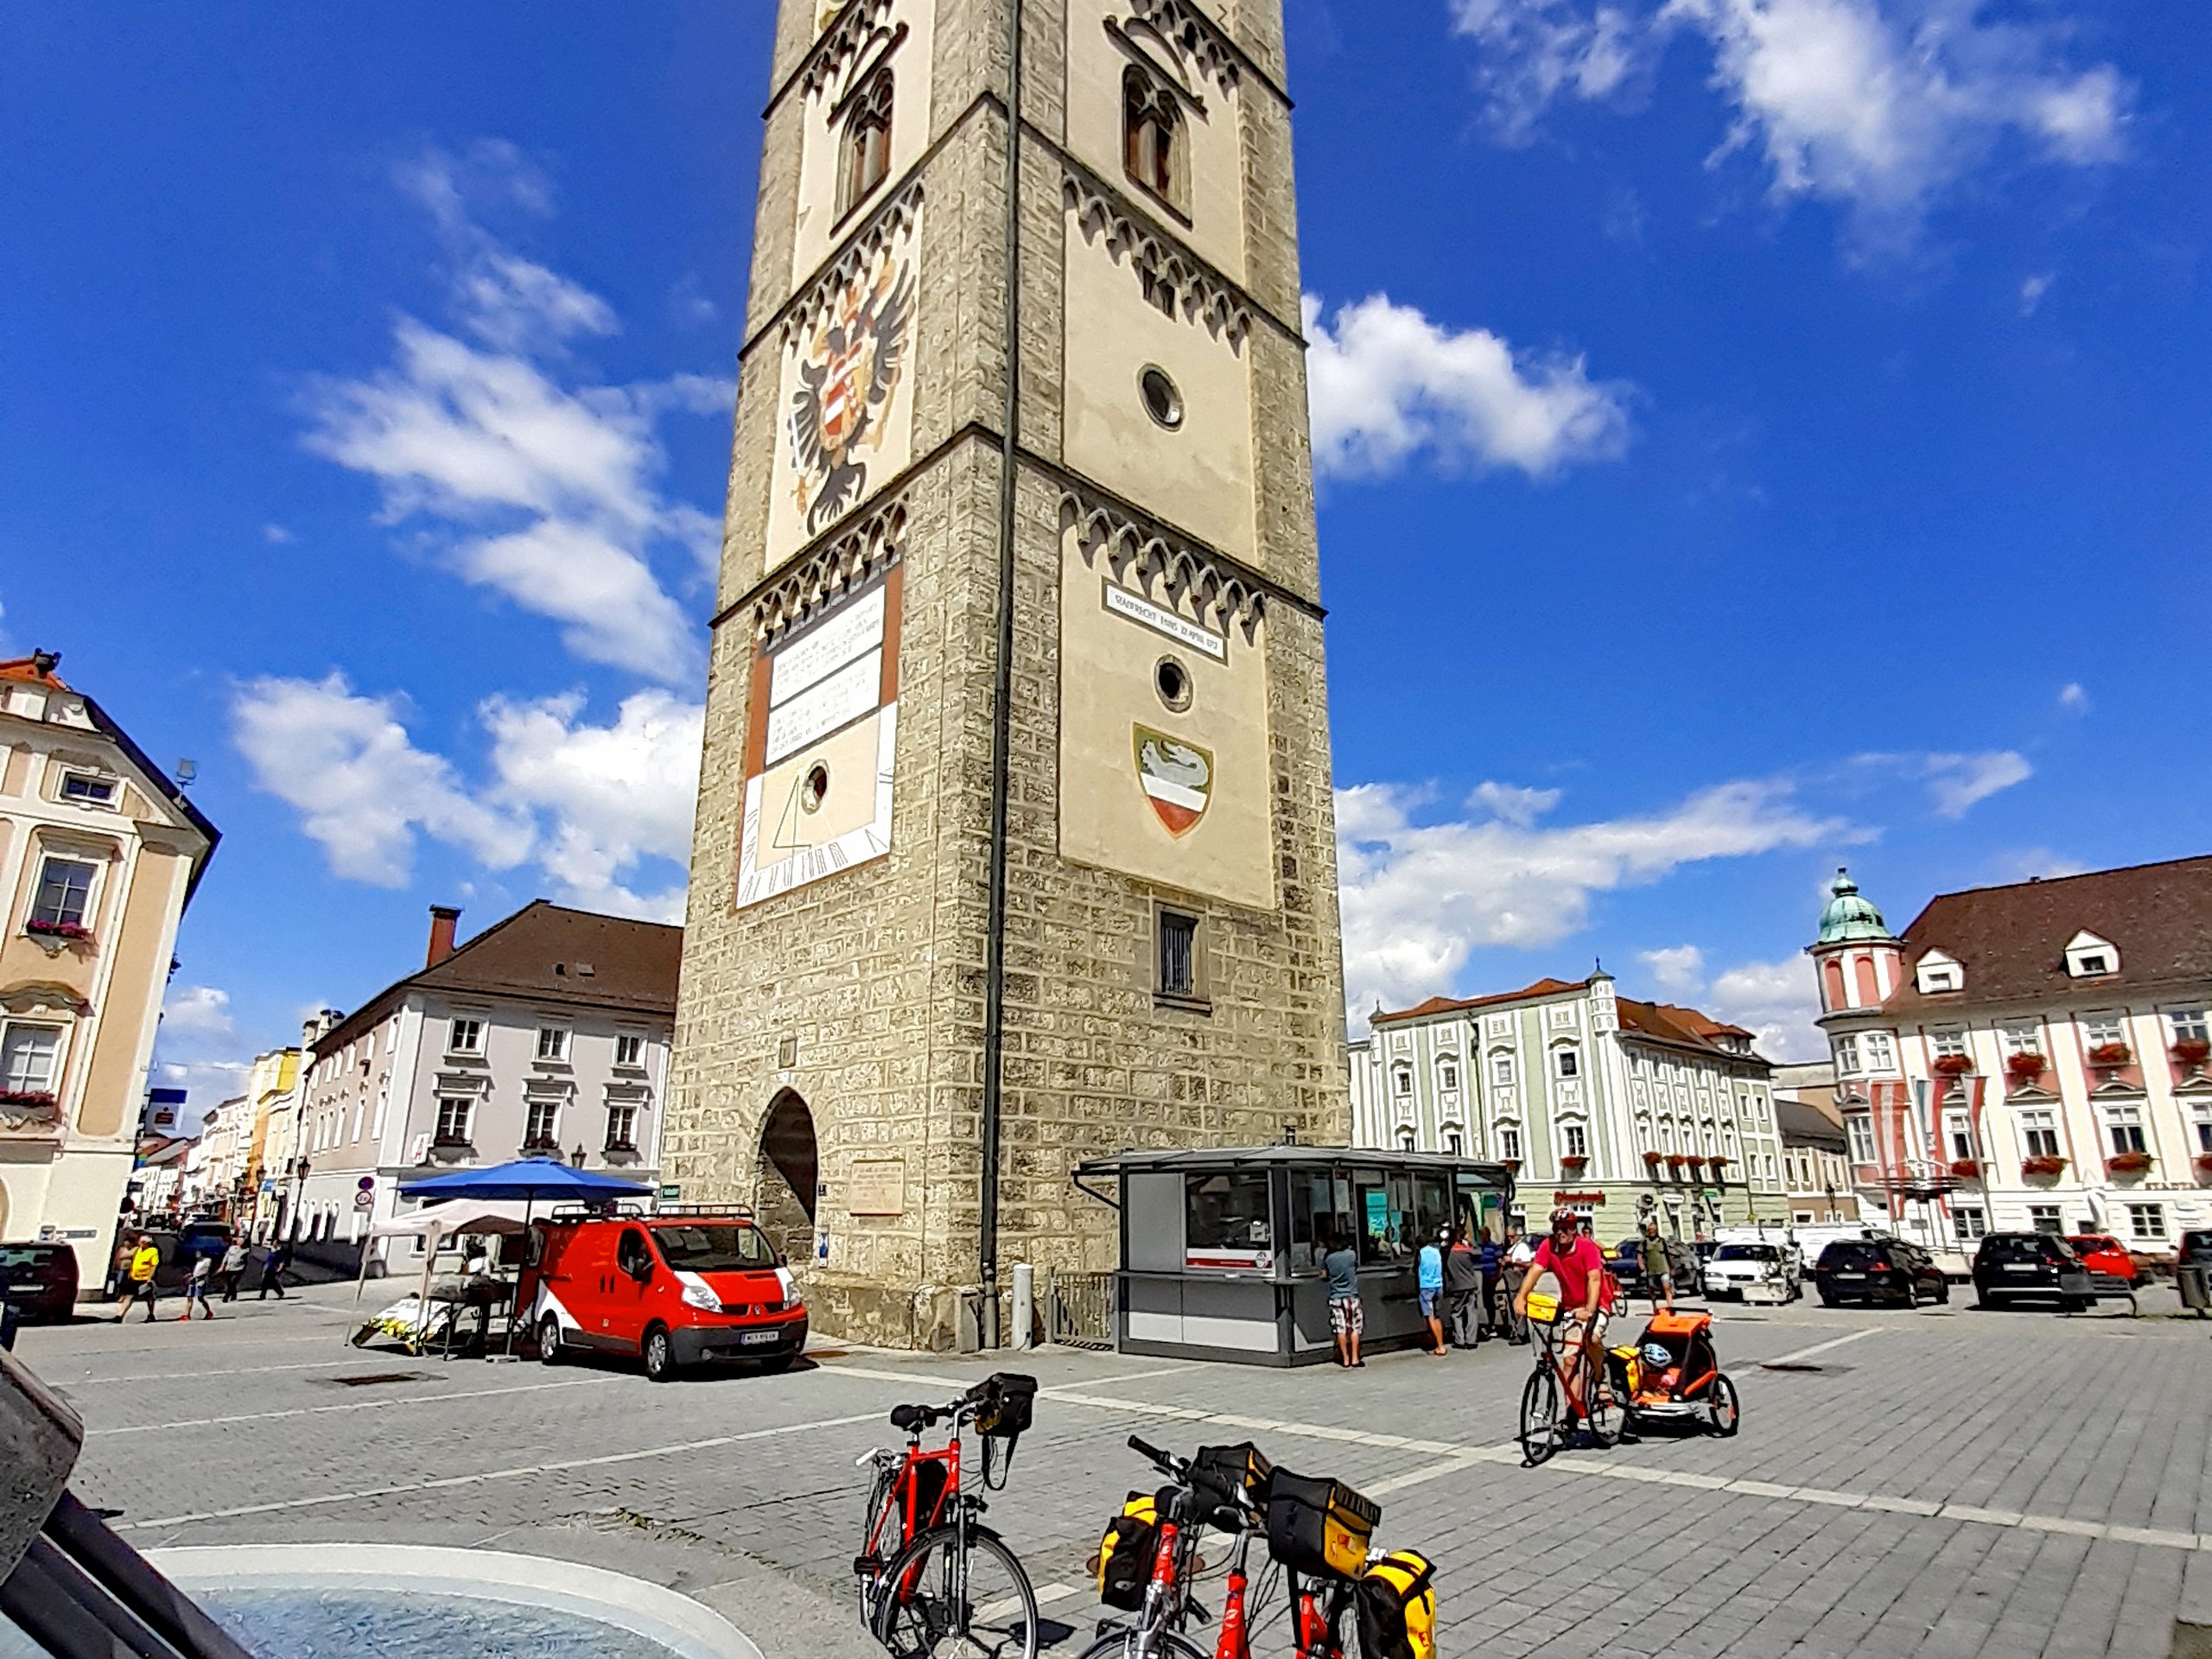 Beautiful small plaza in one of the Austrian towns visited while cycling in Austria